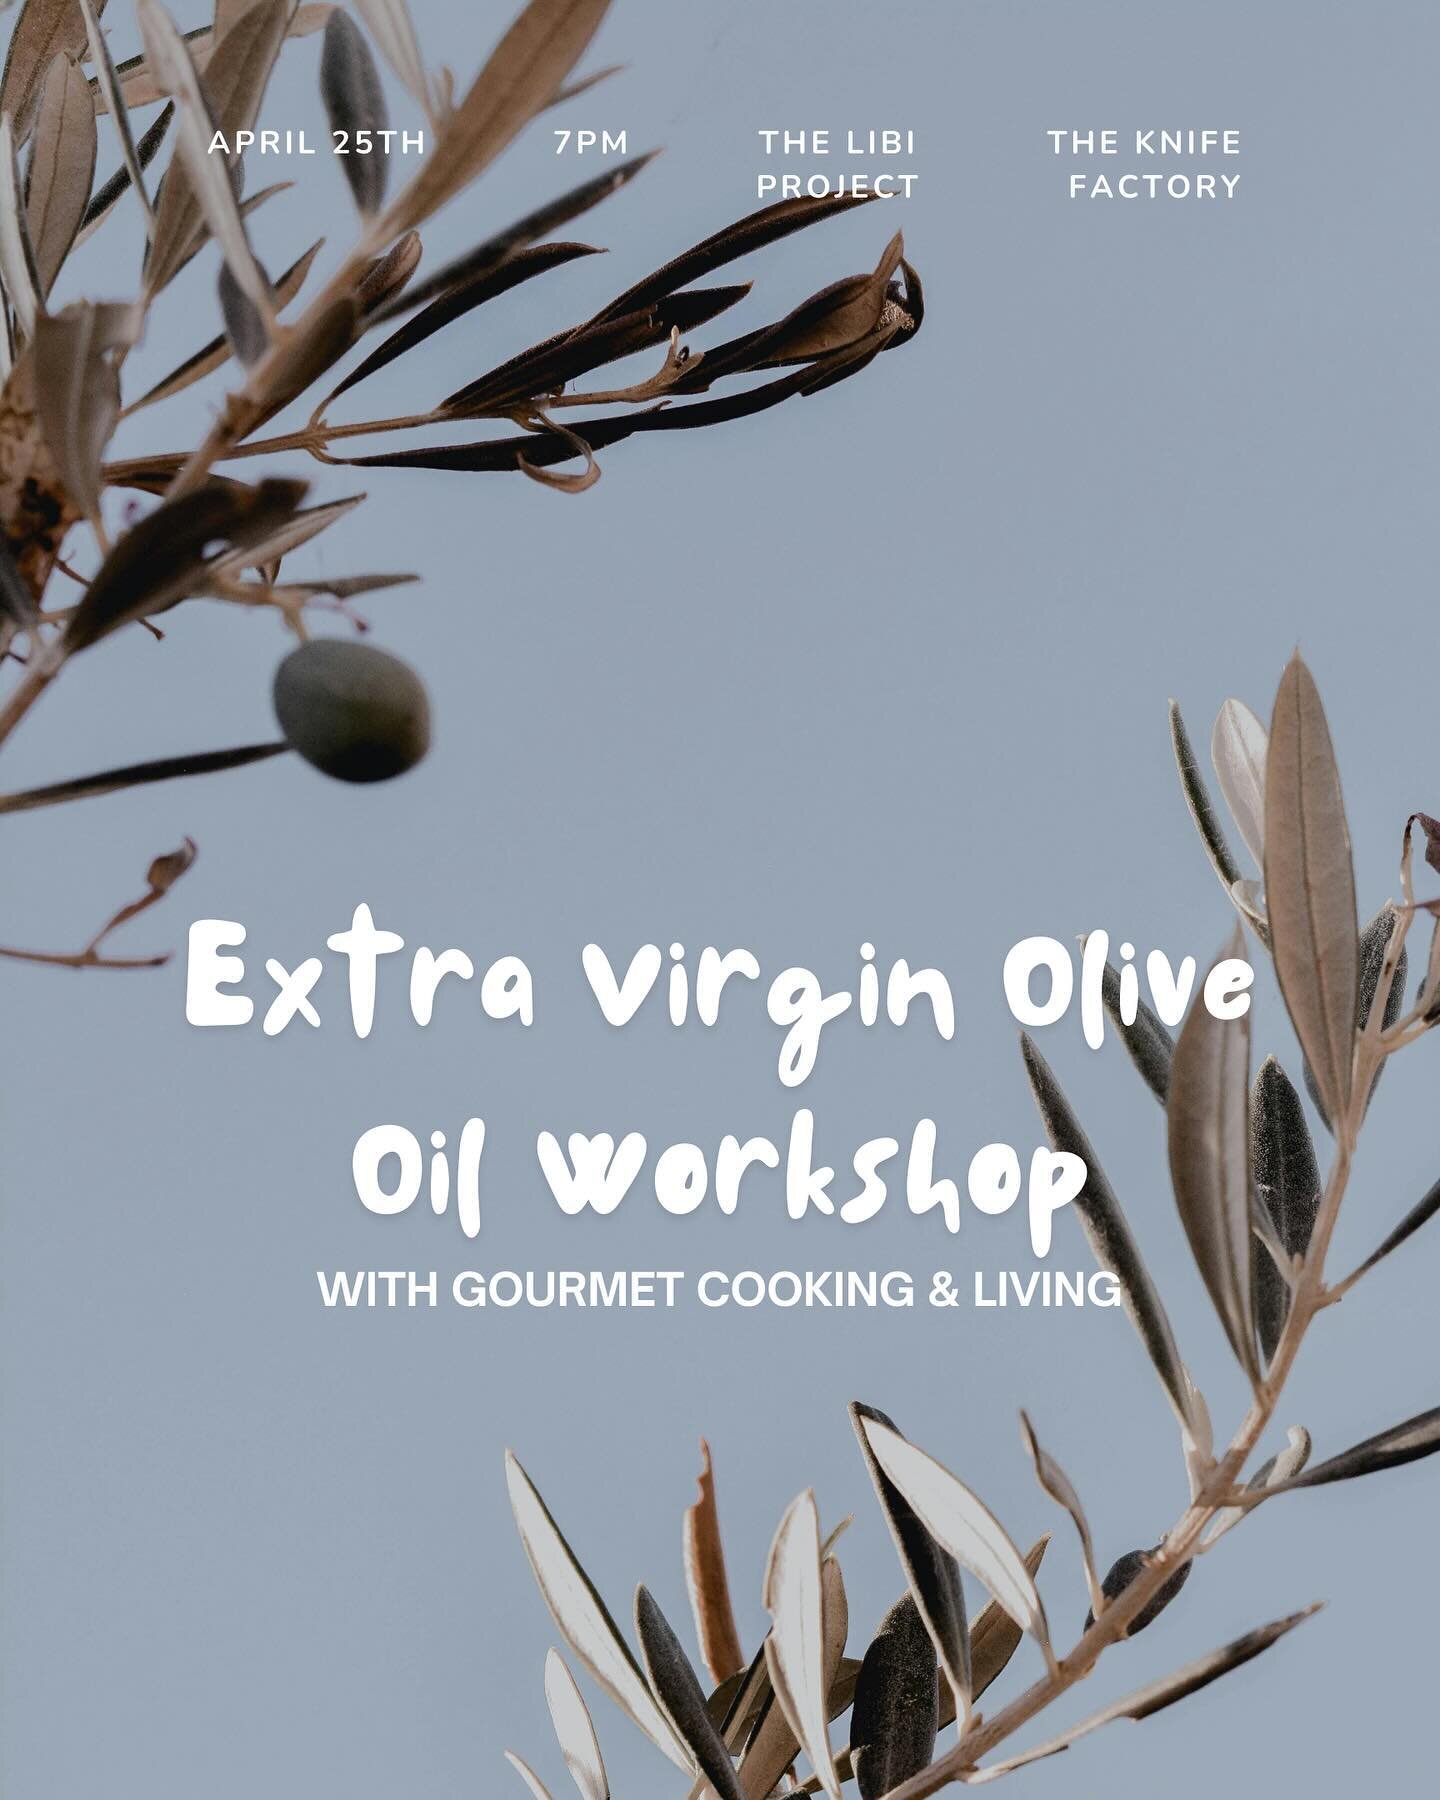 Join us on April 25th @theknifefactory for an EVOO workshop led by Gourmet Cooking &amp; Living where you will discover and taste 6 different extra virgin olive oils from 6 different regions across Italy. Each bottle is produced by farmers of single 